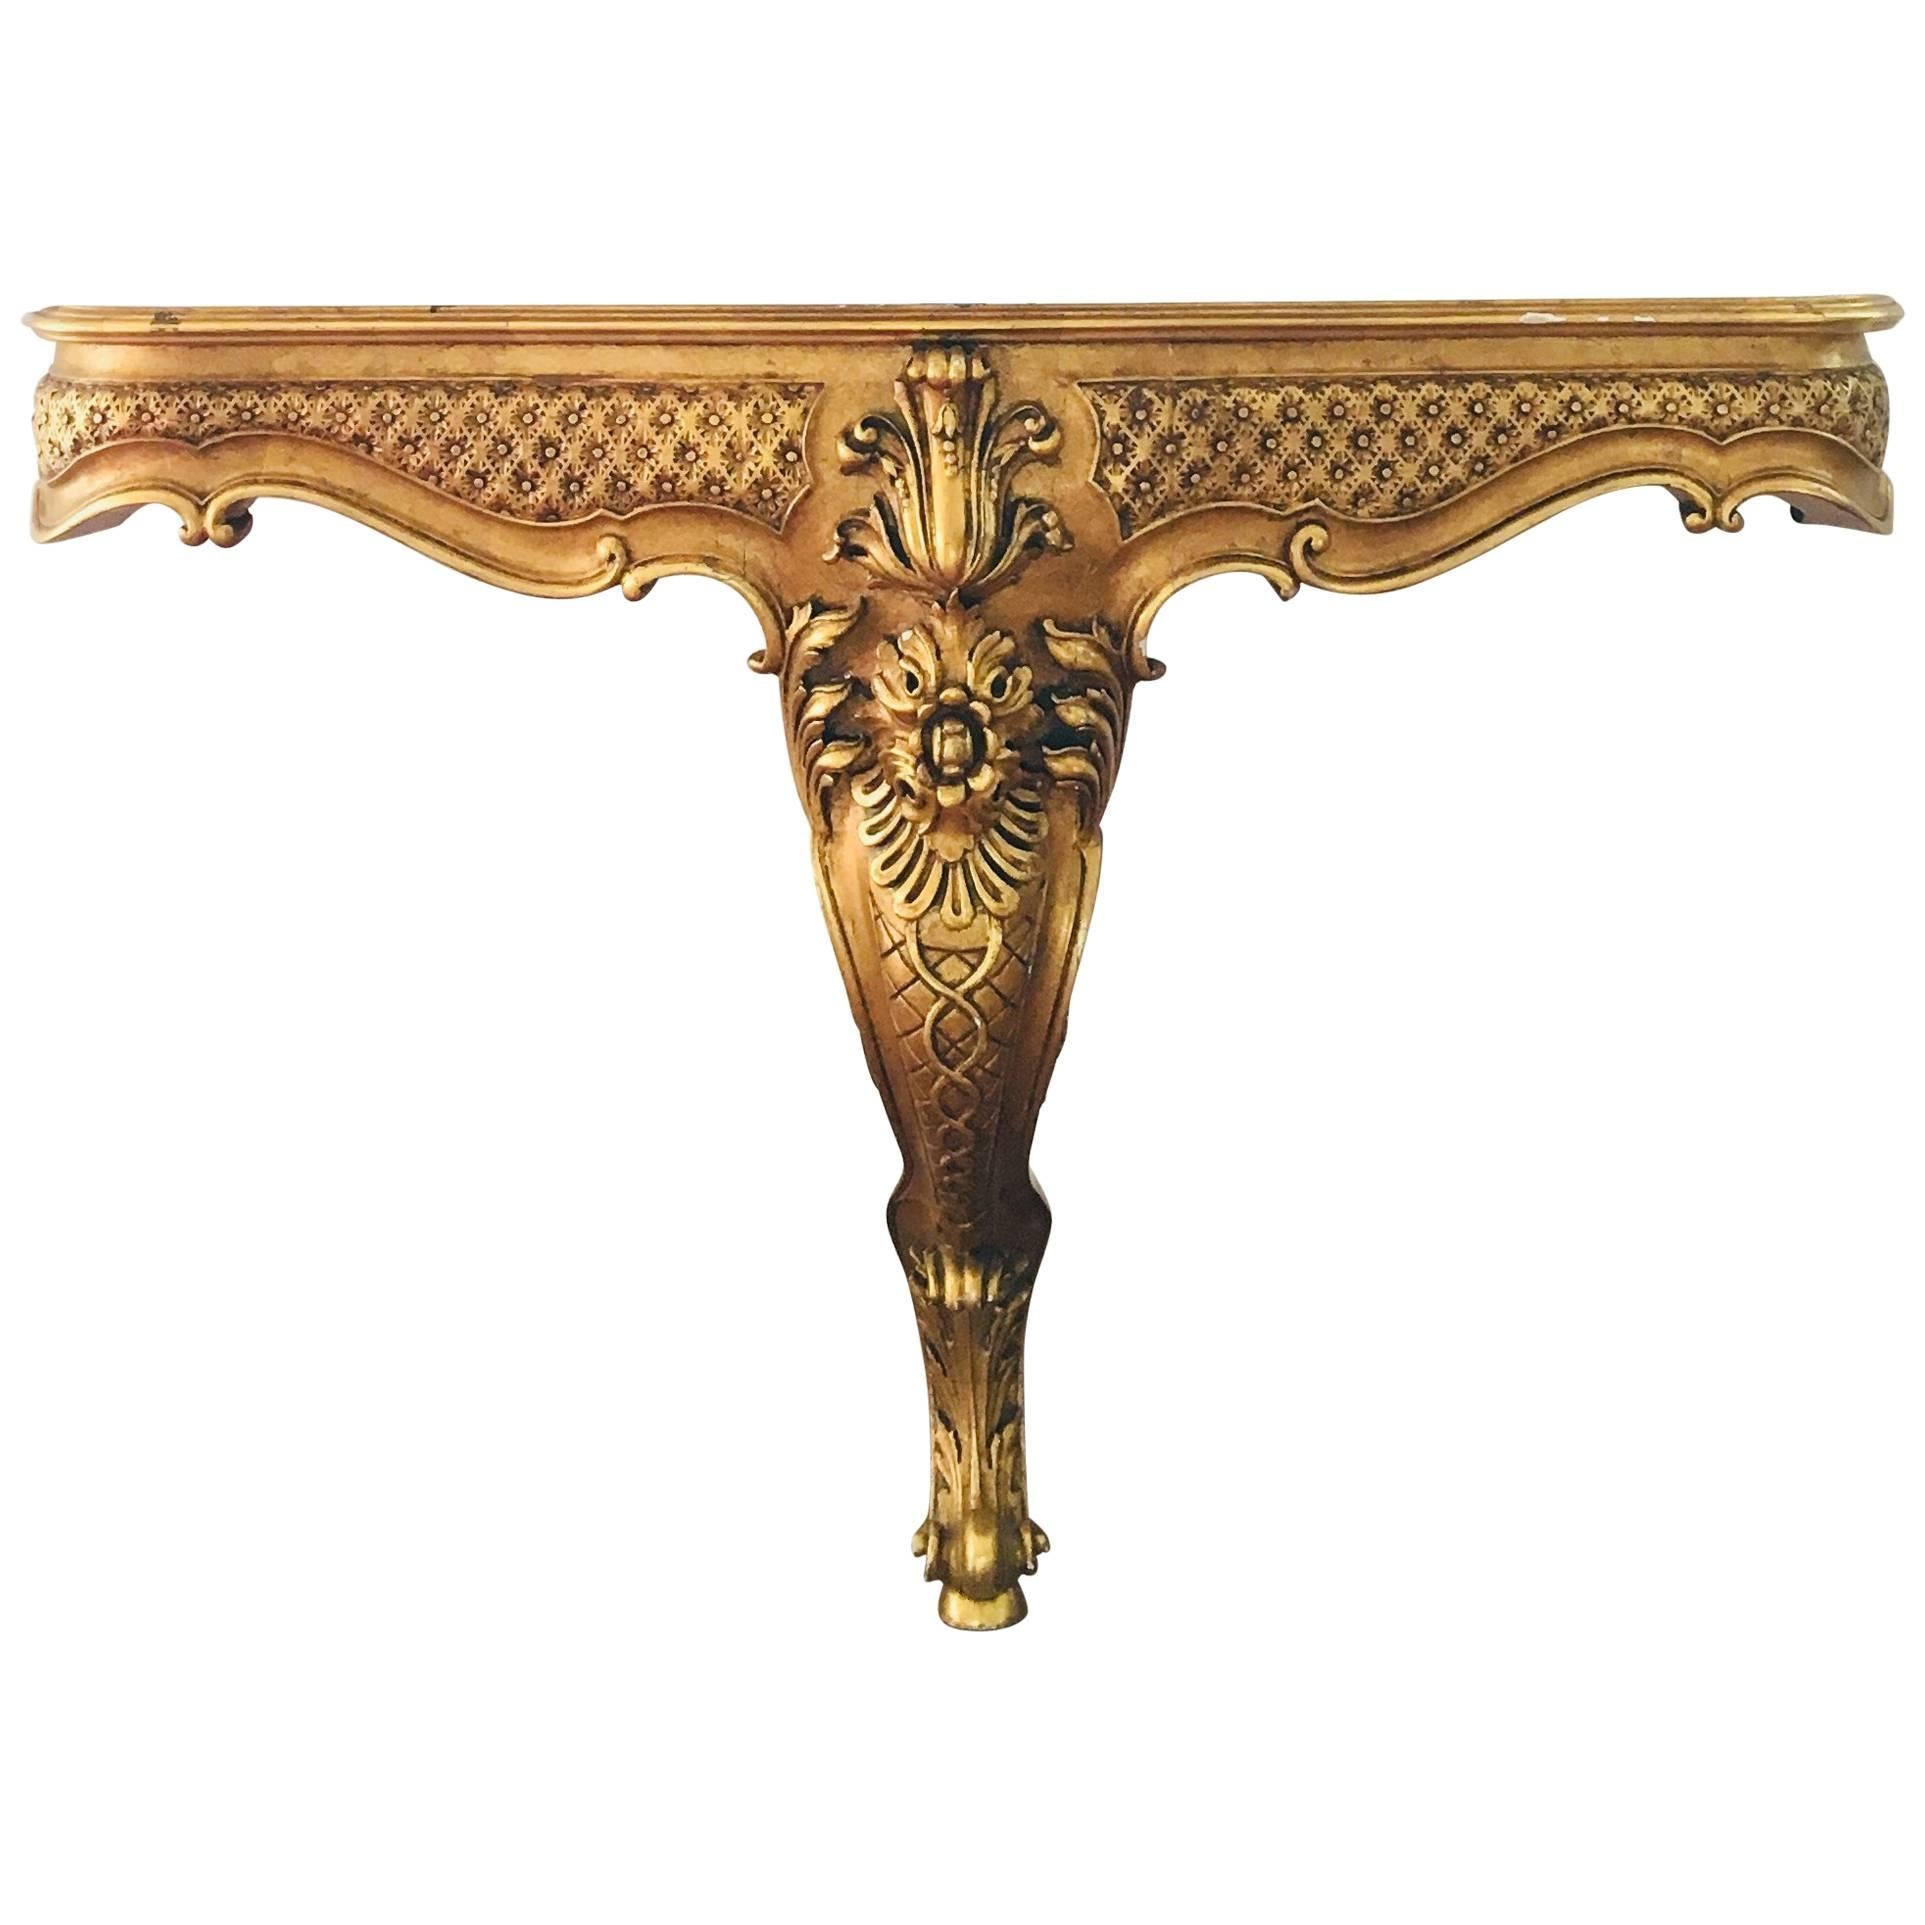 19th Century Giltwood Marble-Top Console Table